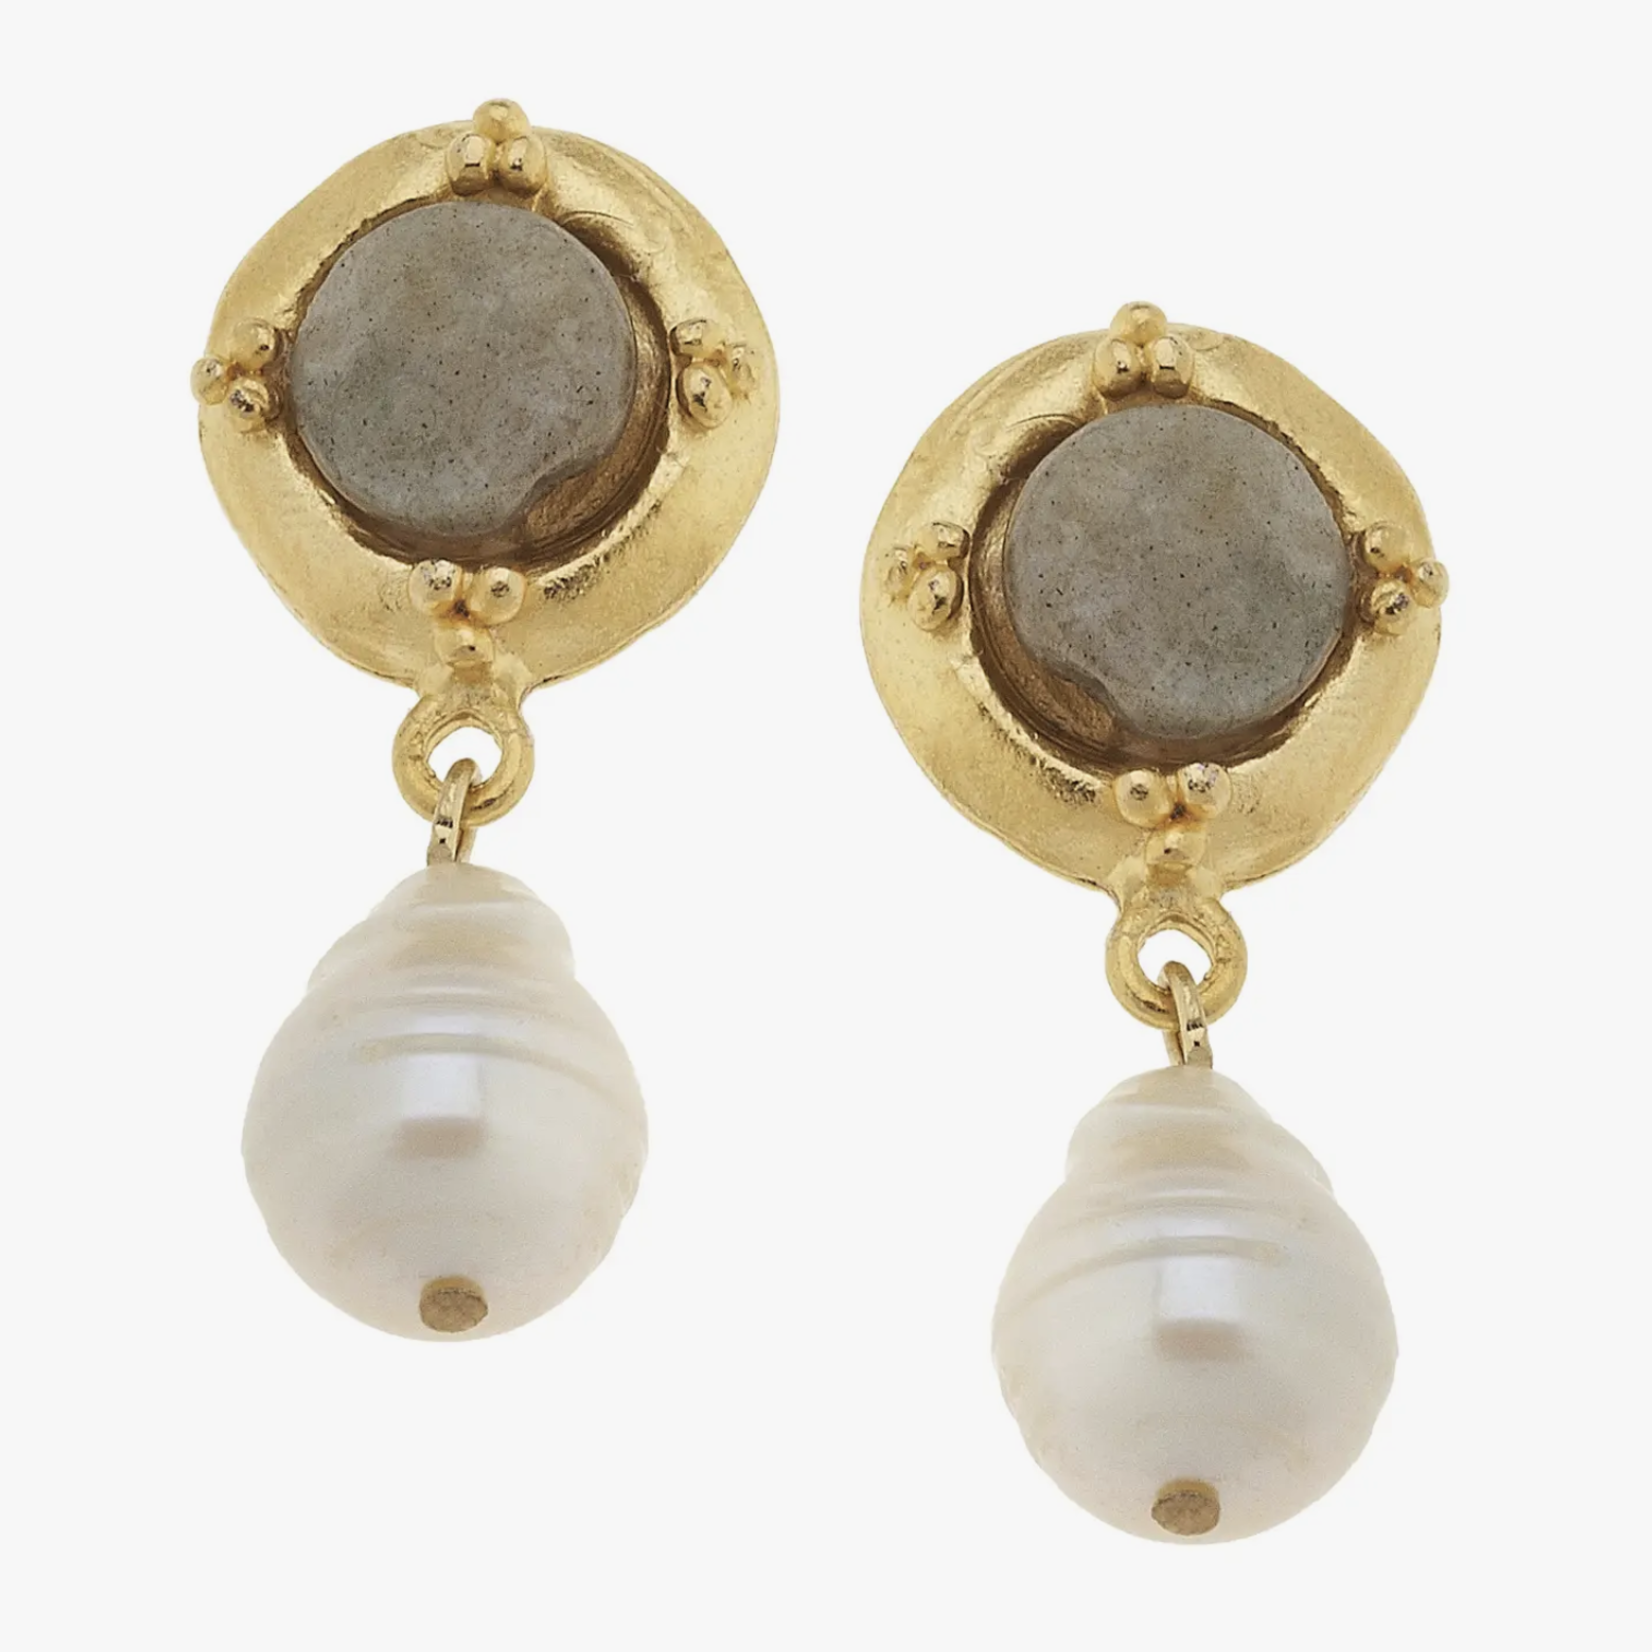 Susan Shaw Gold Cab with Labradorite and Baroque Pearl Earrings